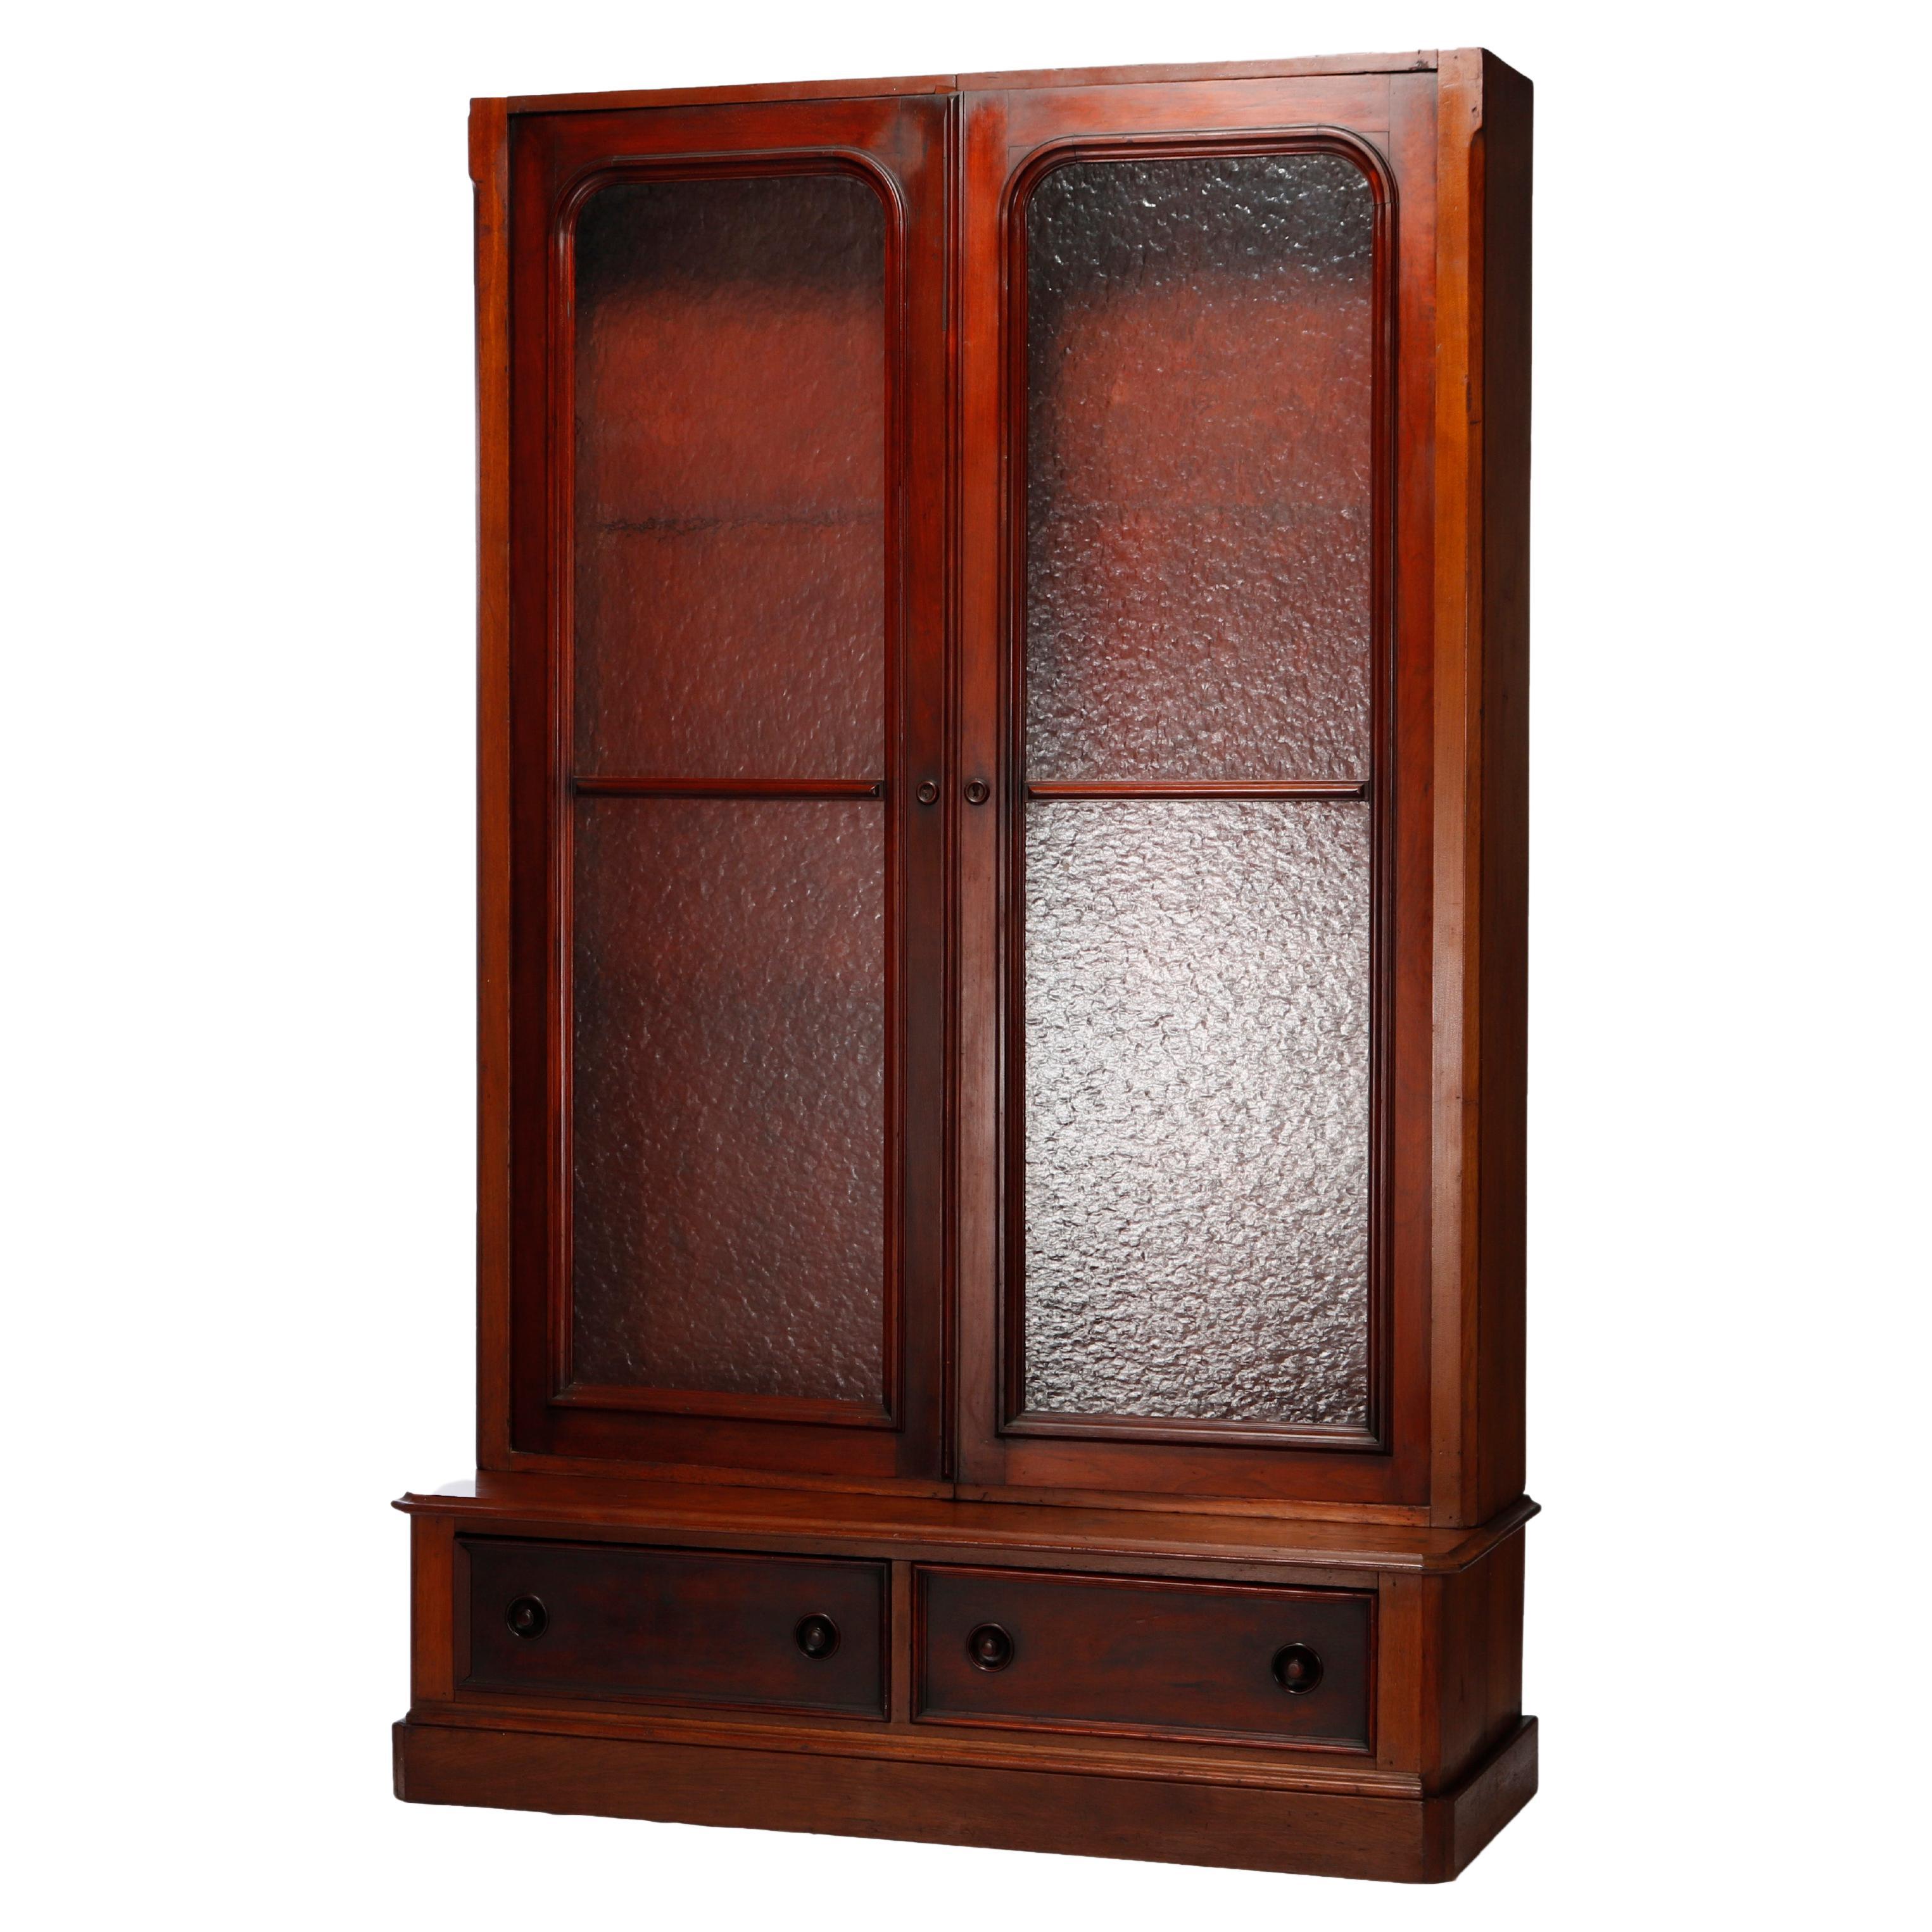 Antique Walnut Double Door Bookcase with Amber Glass, circa 1890